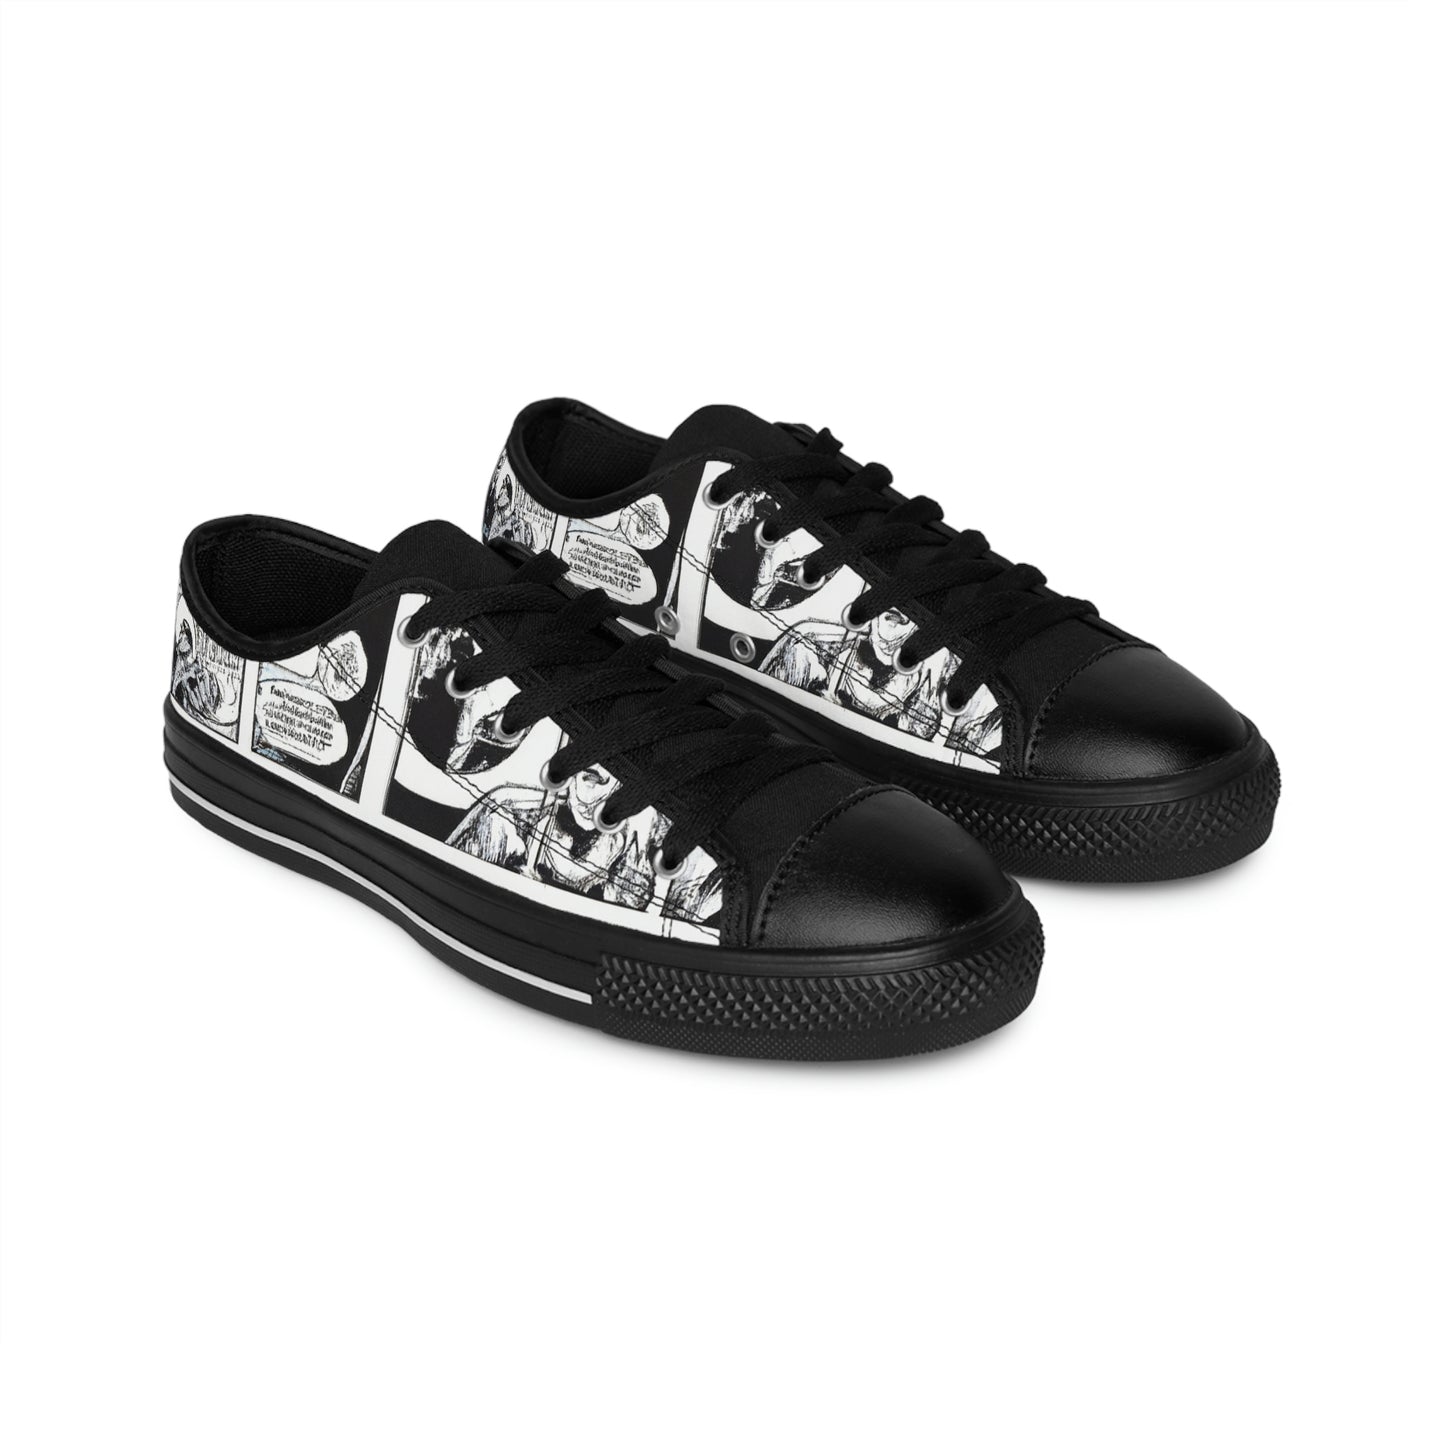 .

Isolde the Shoe Maker - Comic Book Low Top